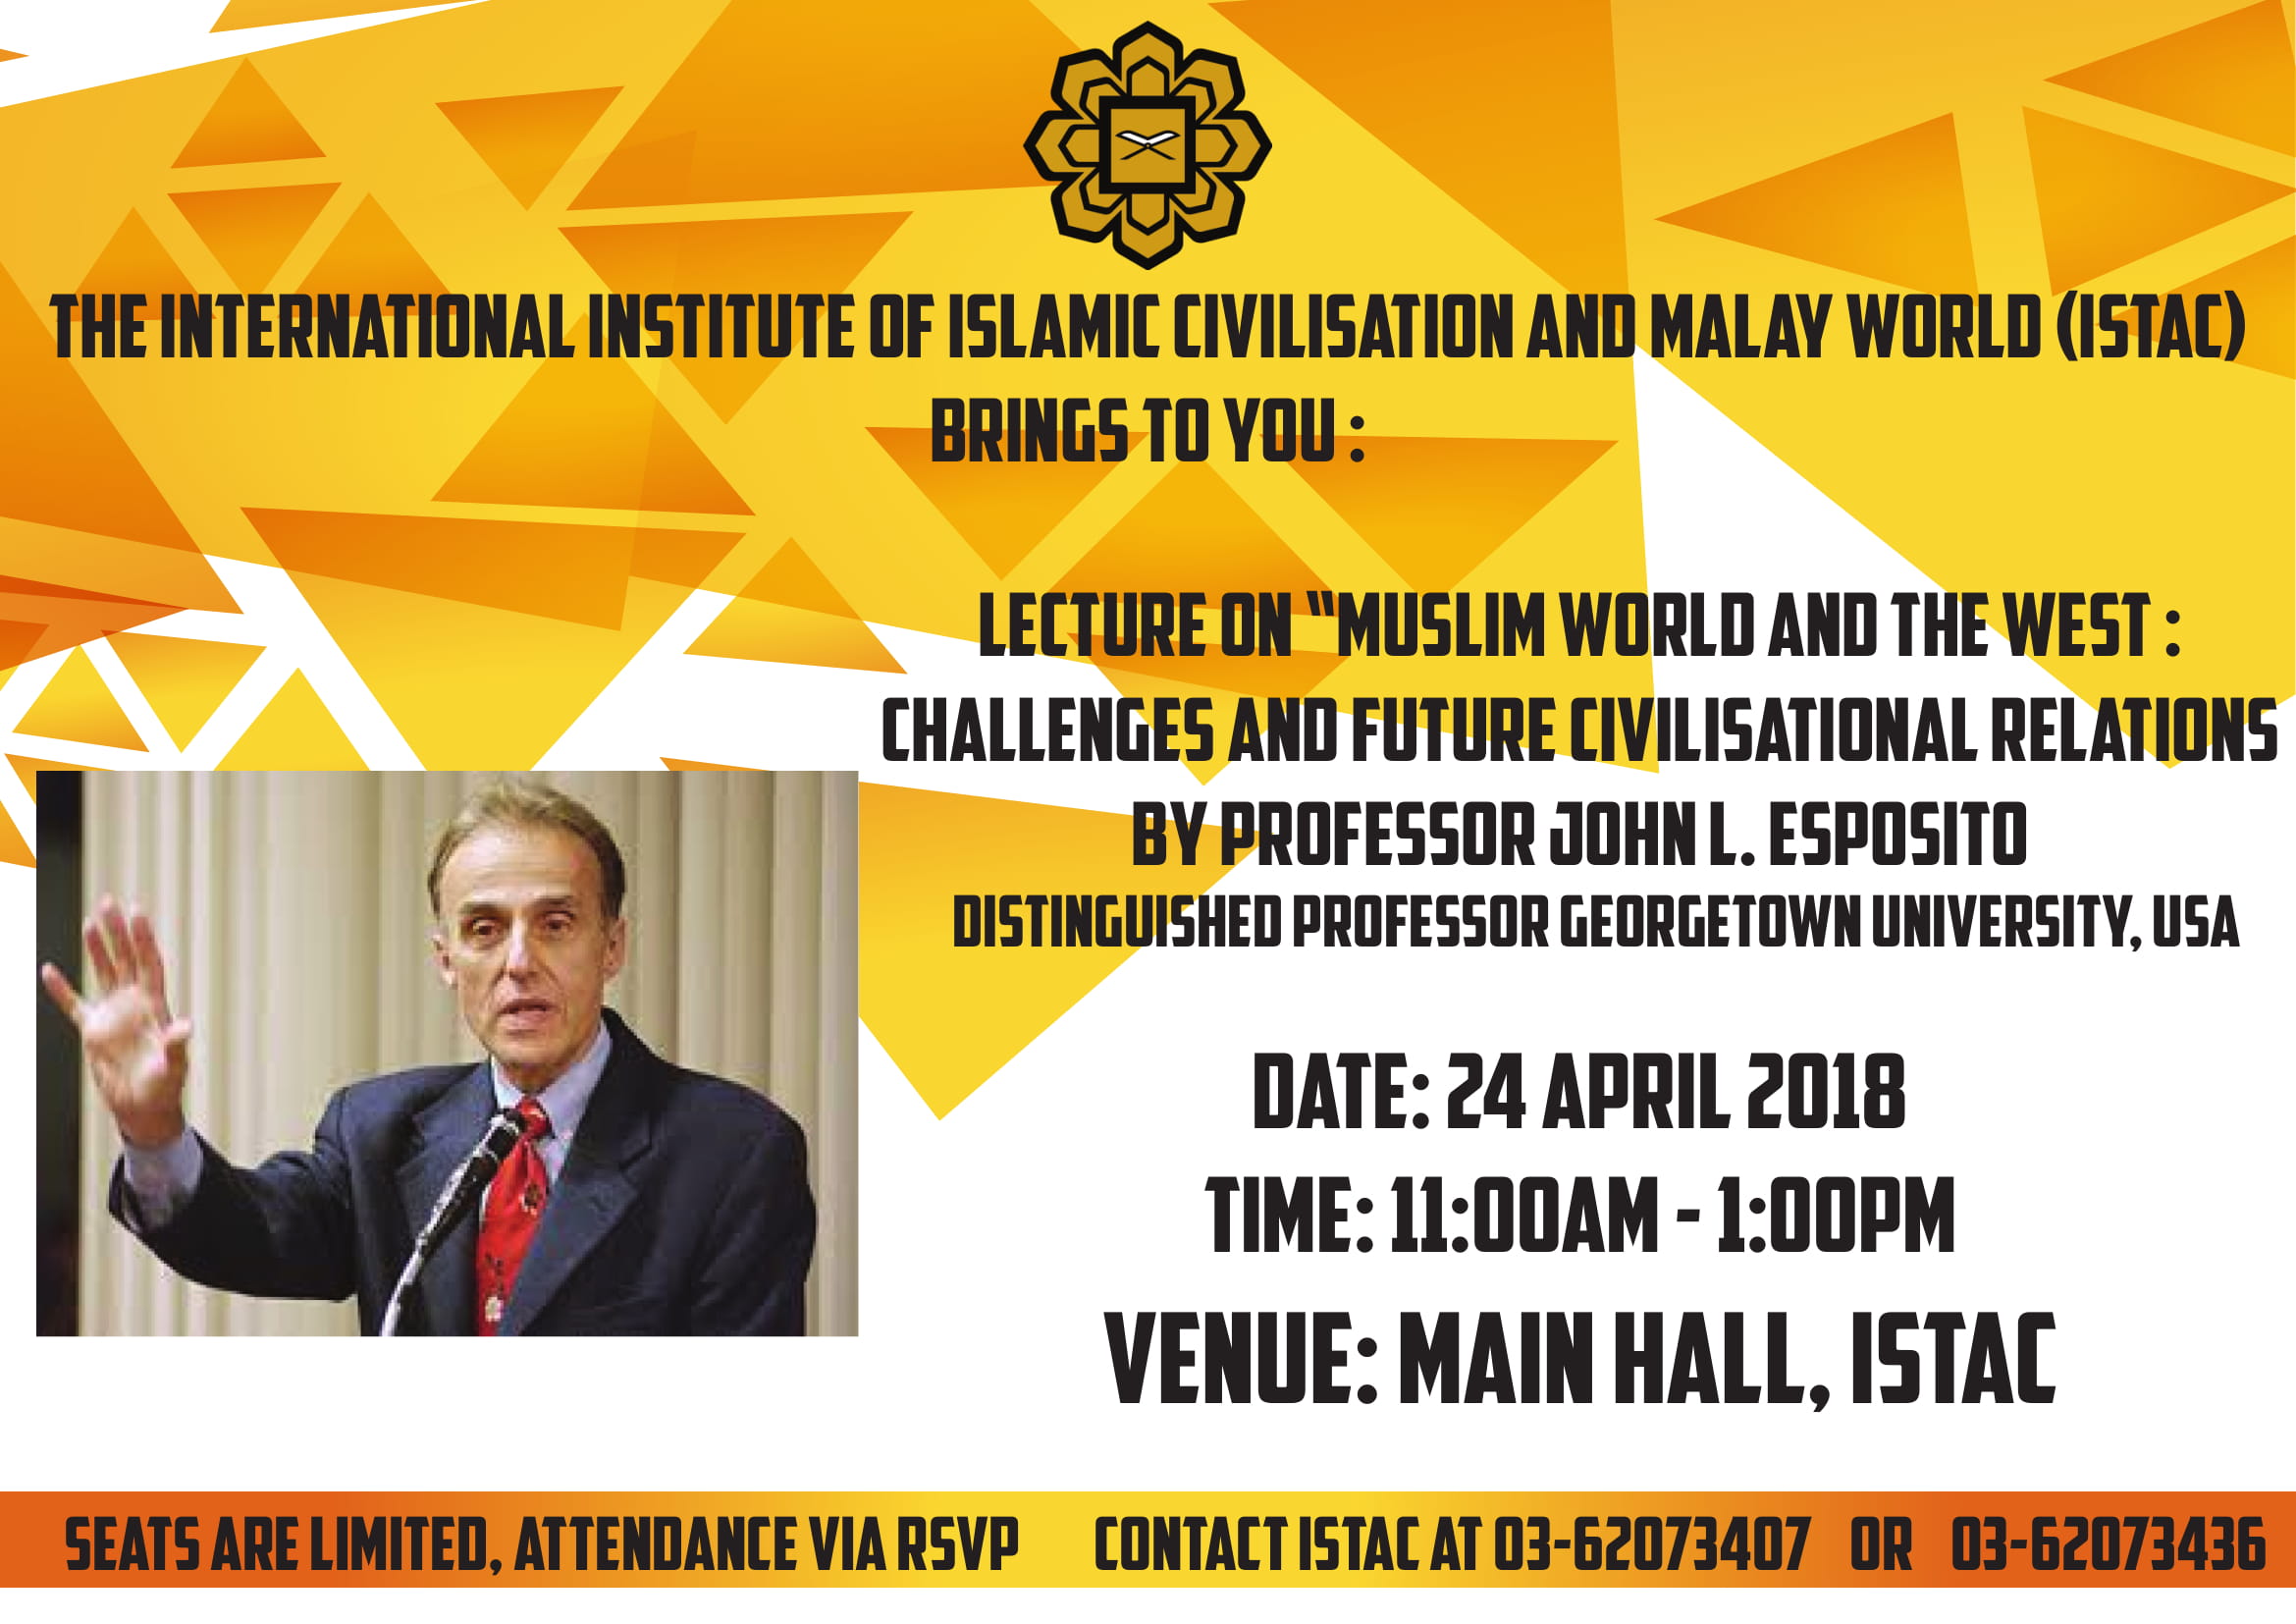 Lecture On " Muslim World And The West: Challenges And Future Civilisational Relations By Prof. John L. Esposito